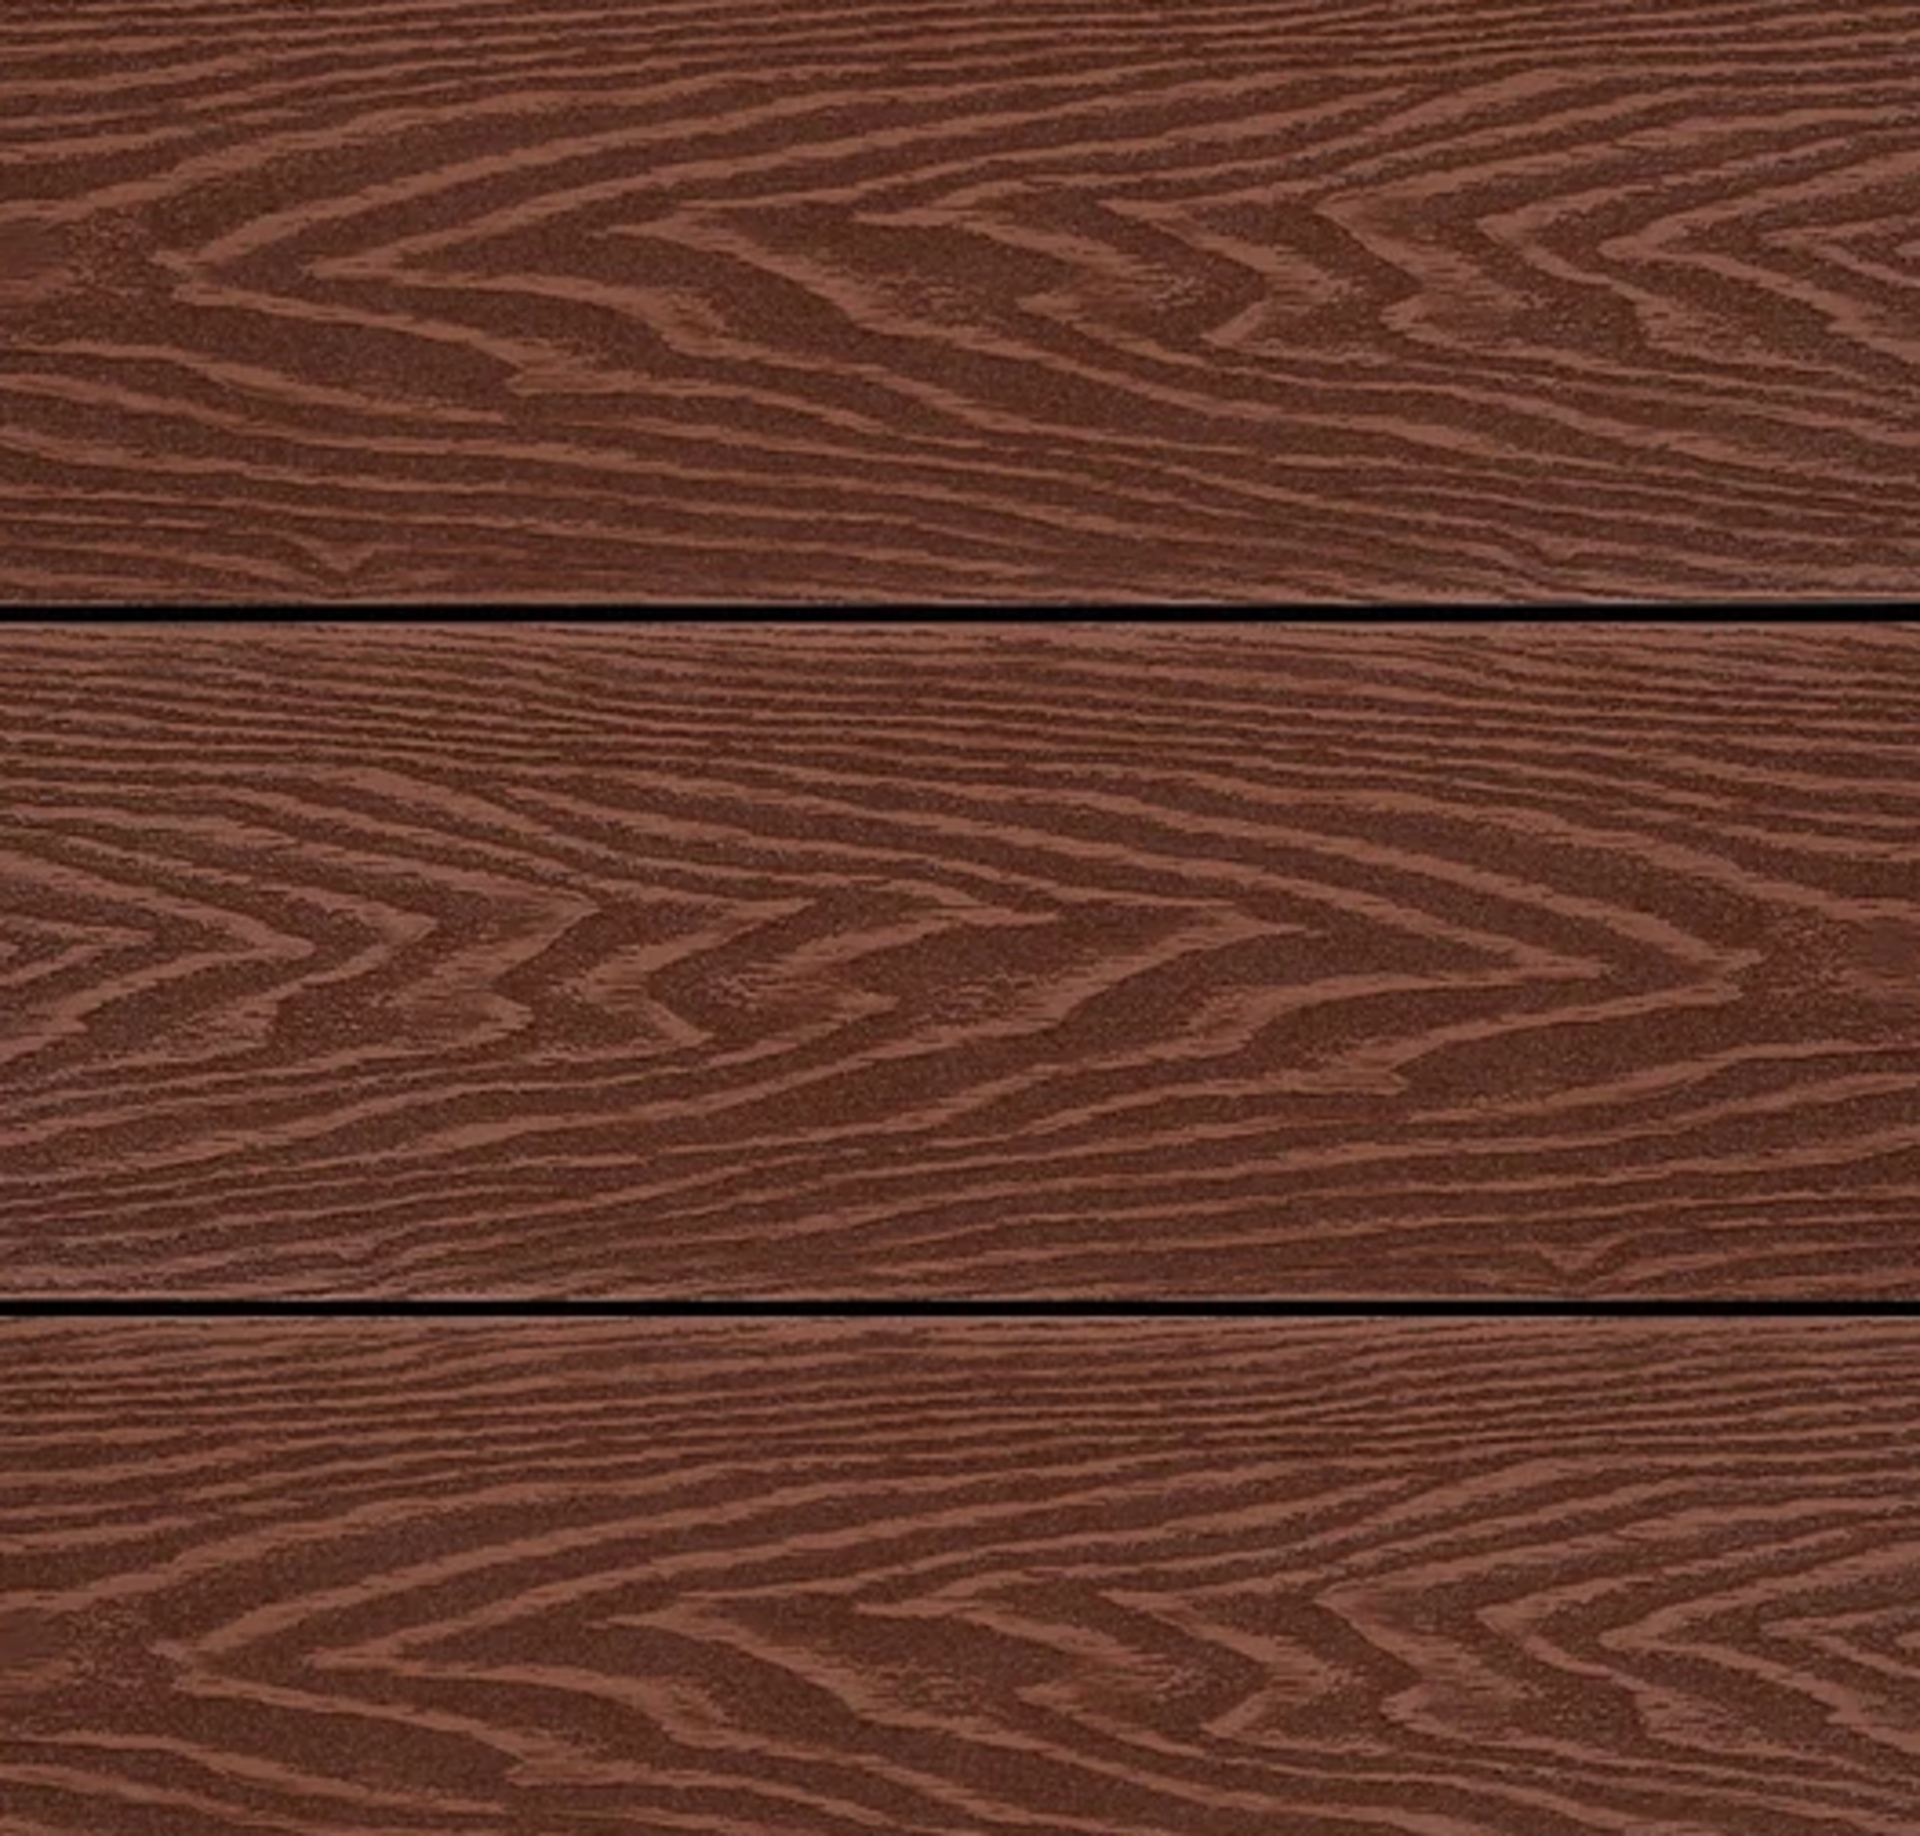 * 20 WPC Composite Coffee Double sided Embossed Woodgrain Decking Boards 2900mm x 146mm x 25mm - Image 4 of 4